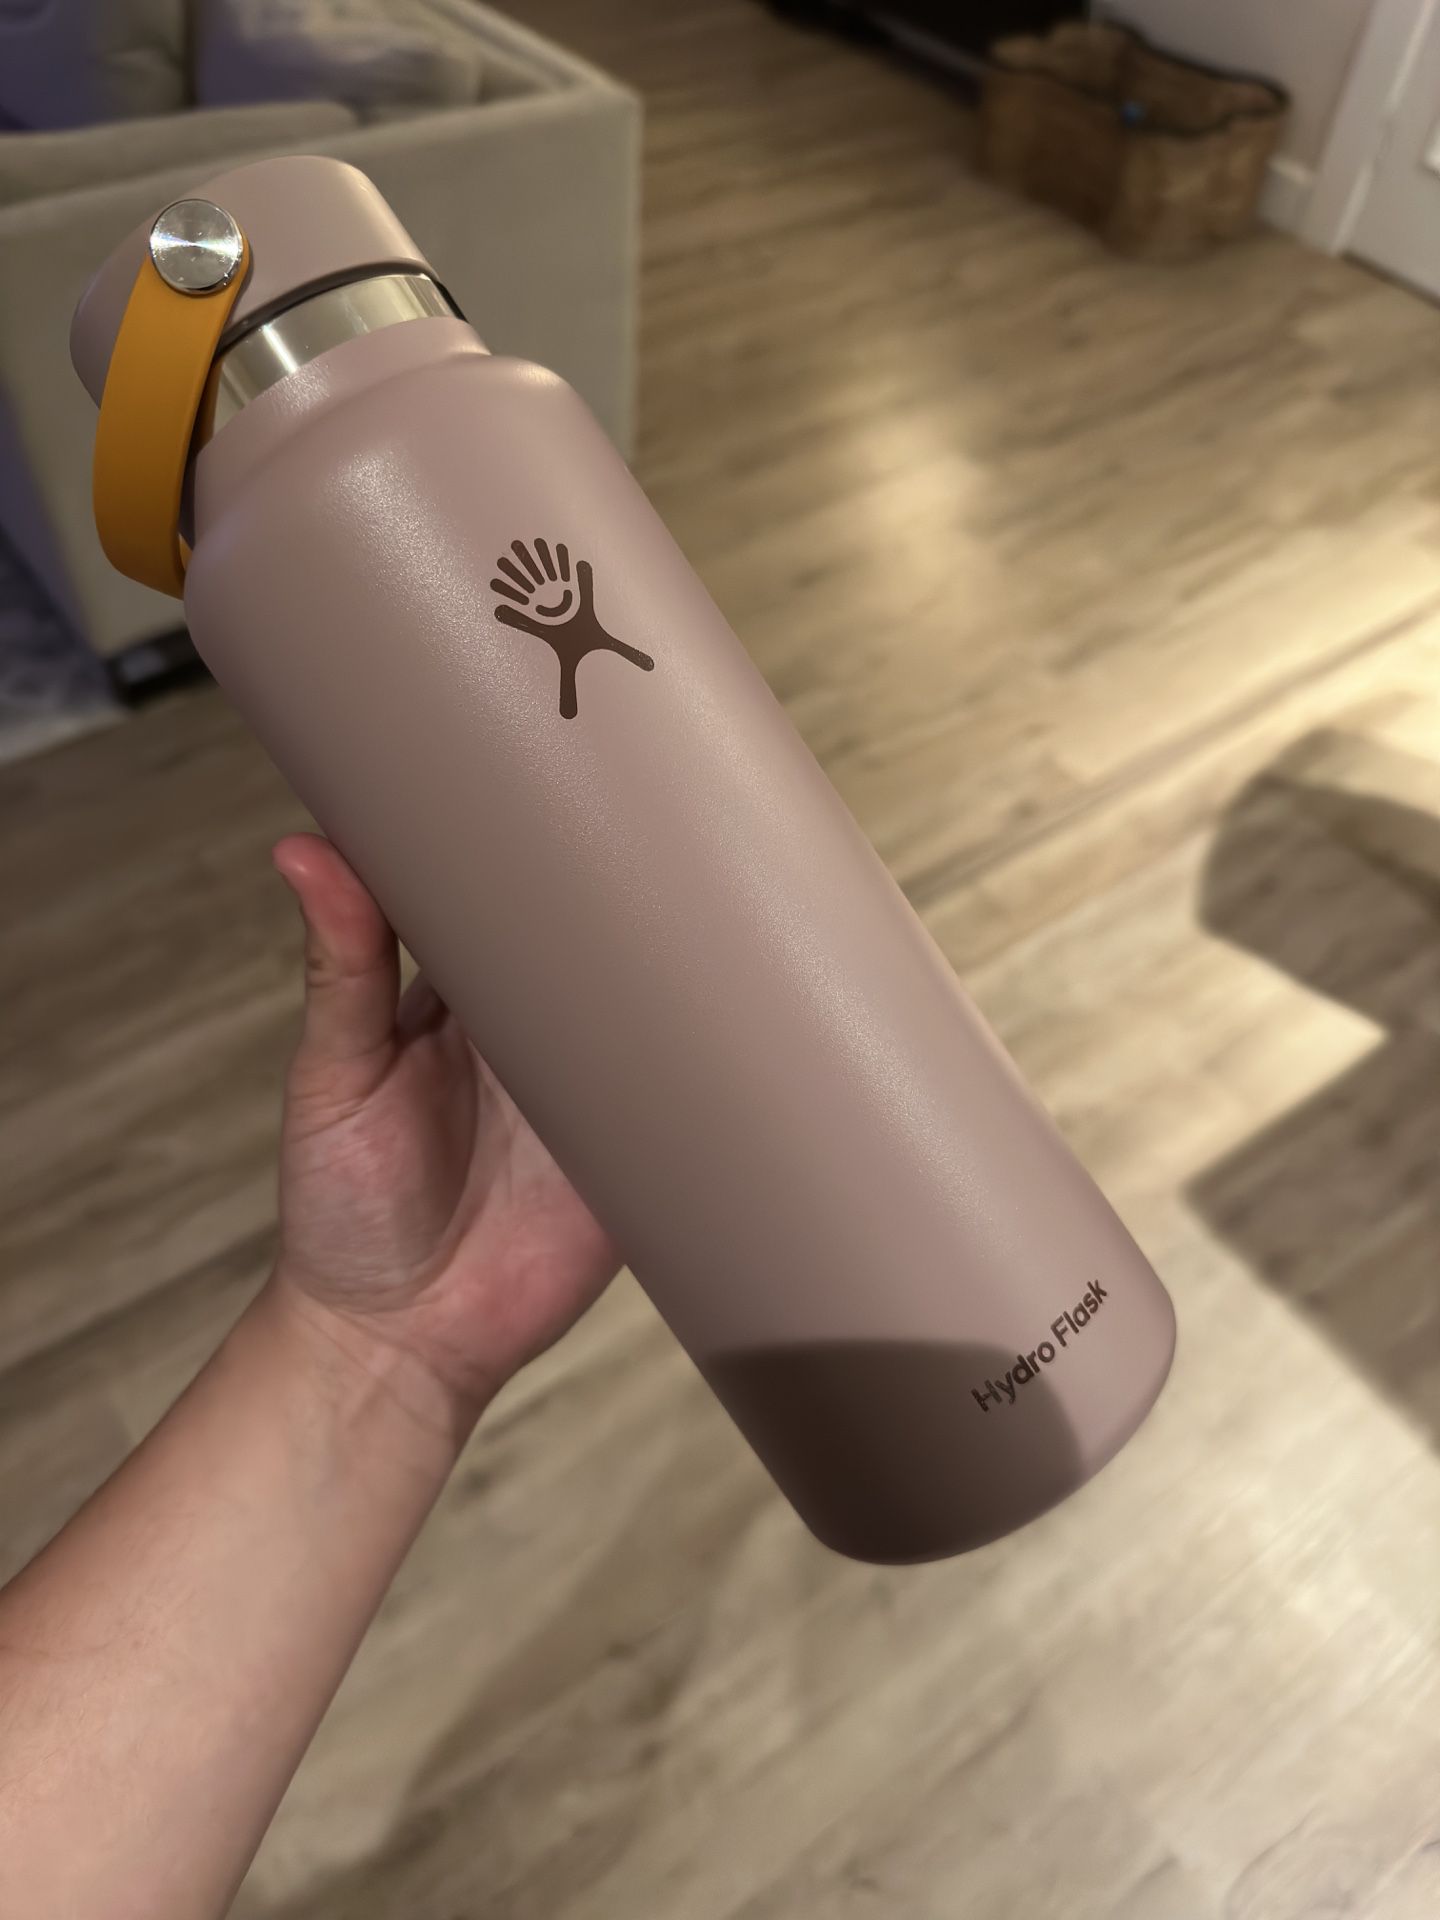 Limited Edition Mocha Hydroflask New with box and - Depop